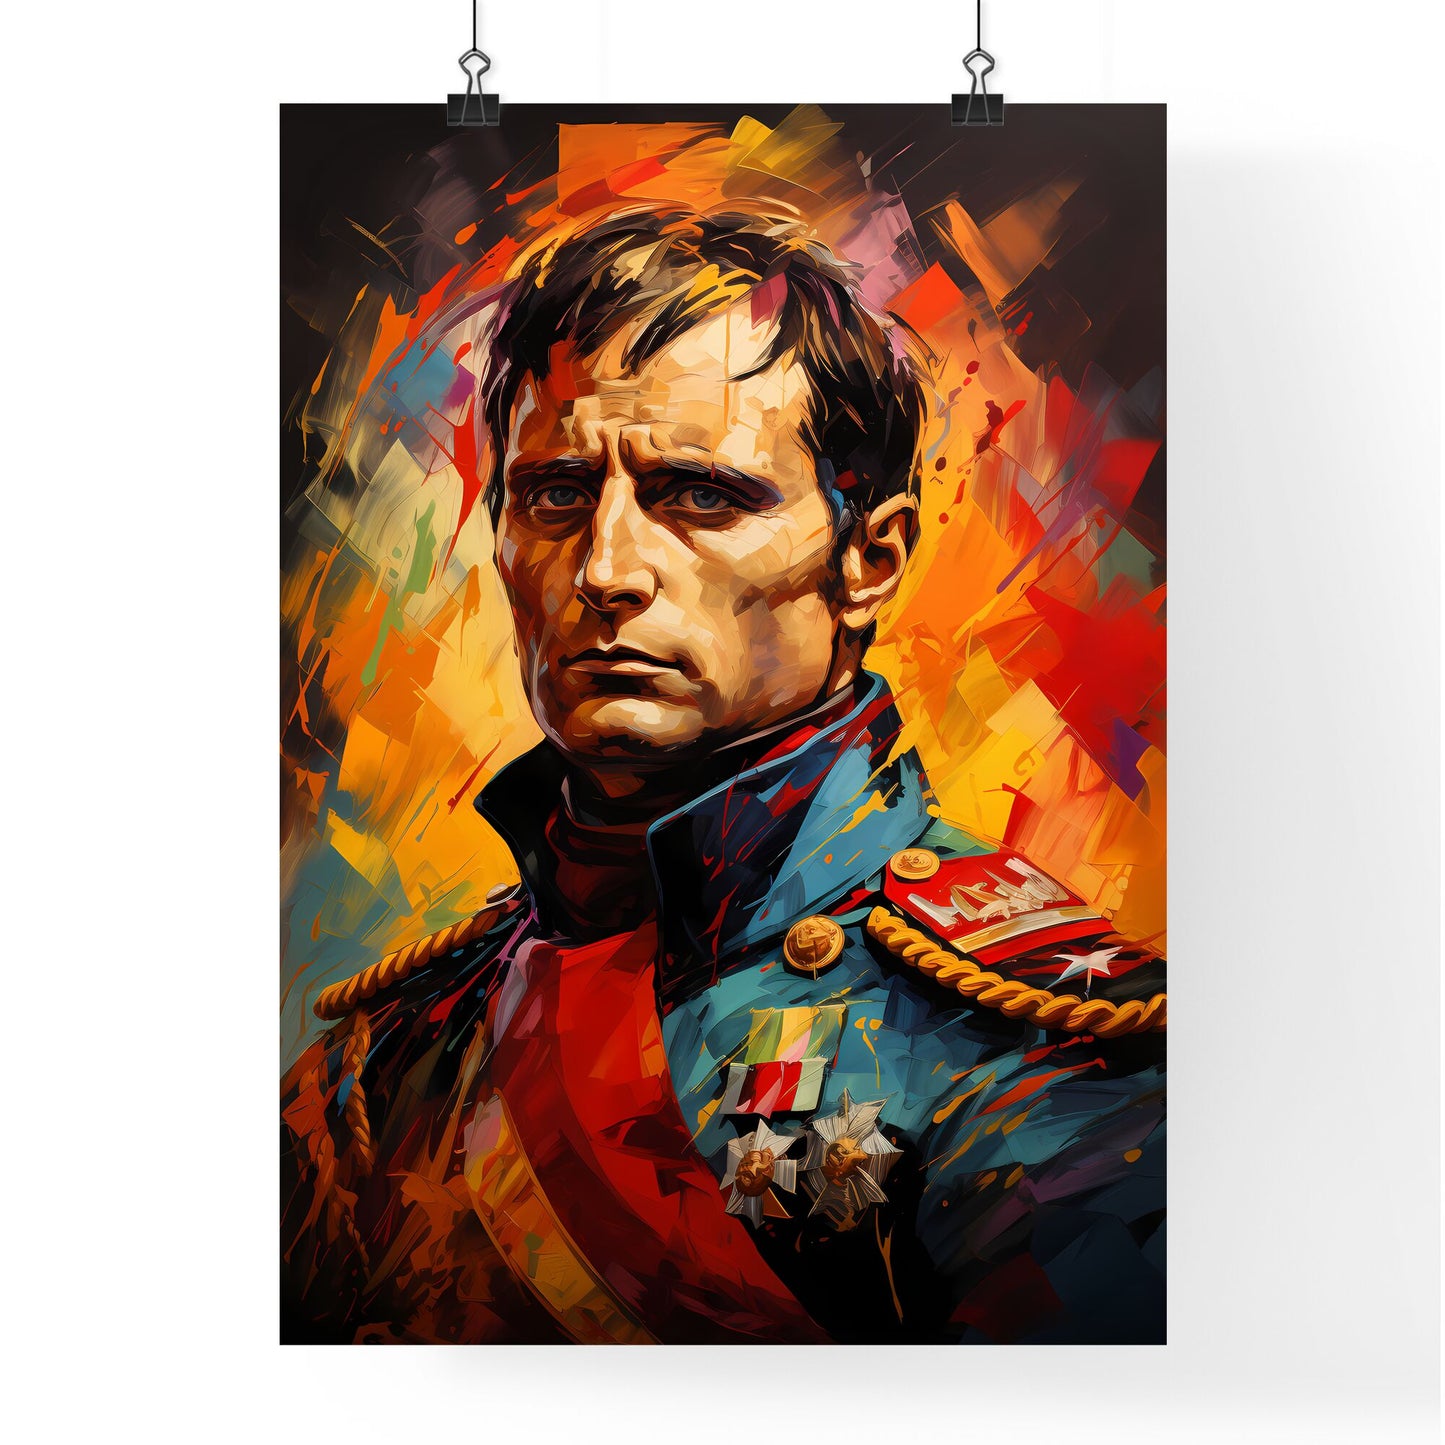 Napoleon Bonaparte French Military And Political Leader - A Painting Of A Man In A Military Uniform Default Title